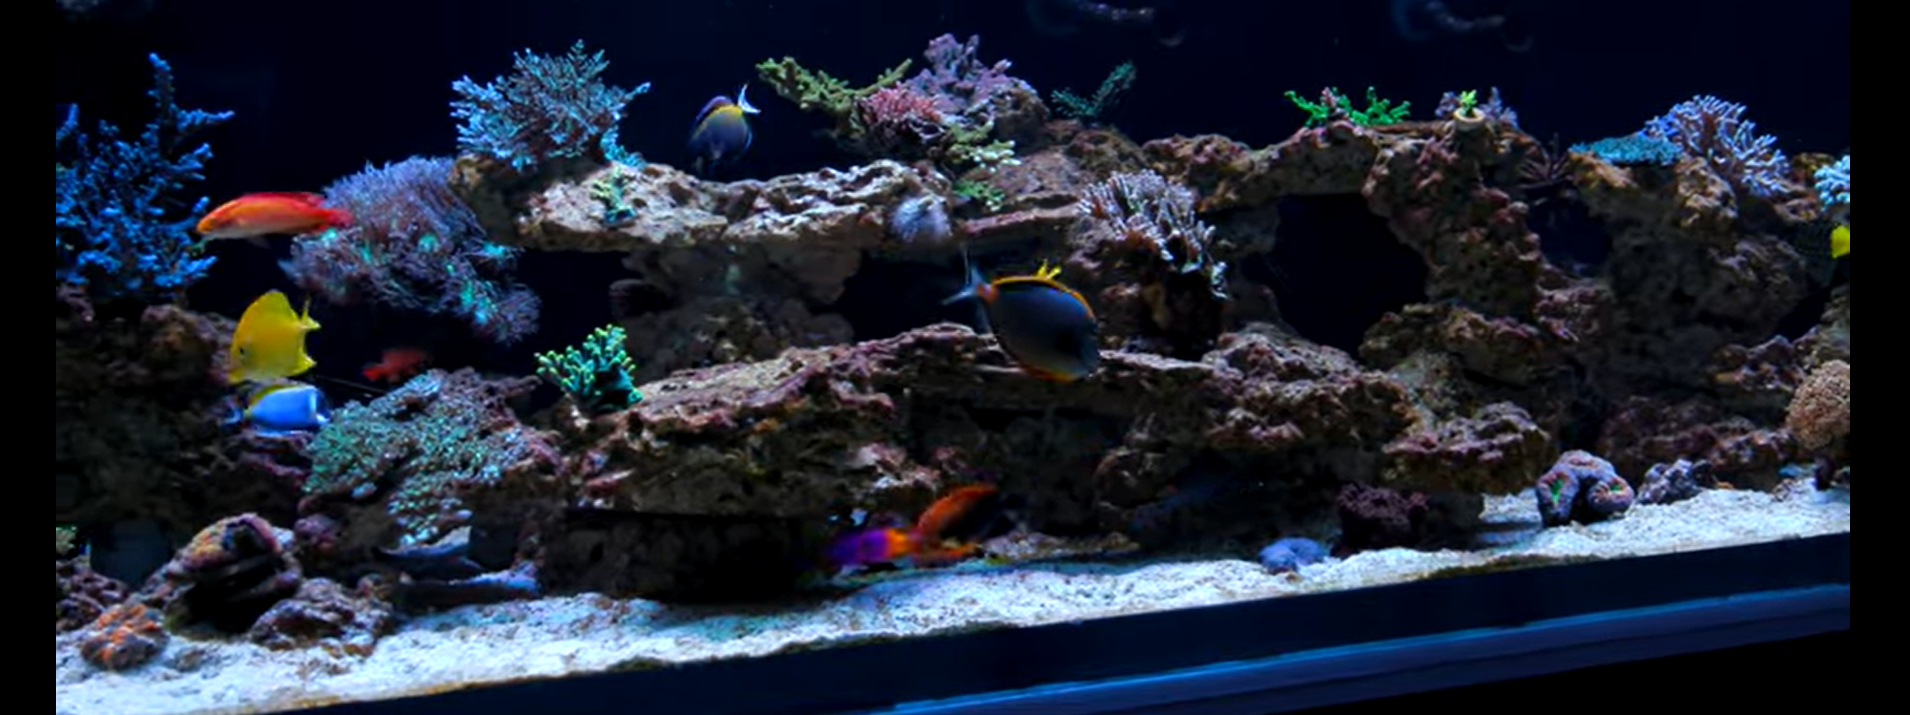 Conversation with Nathan about his new Reef Aquarium